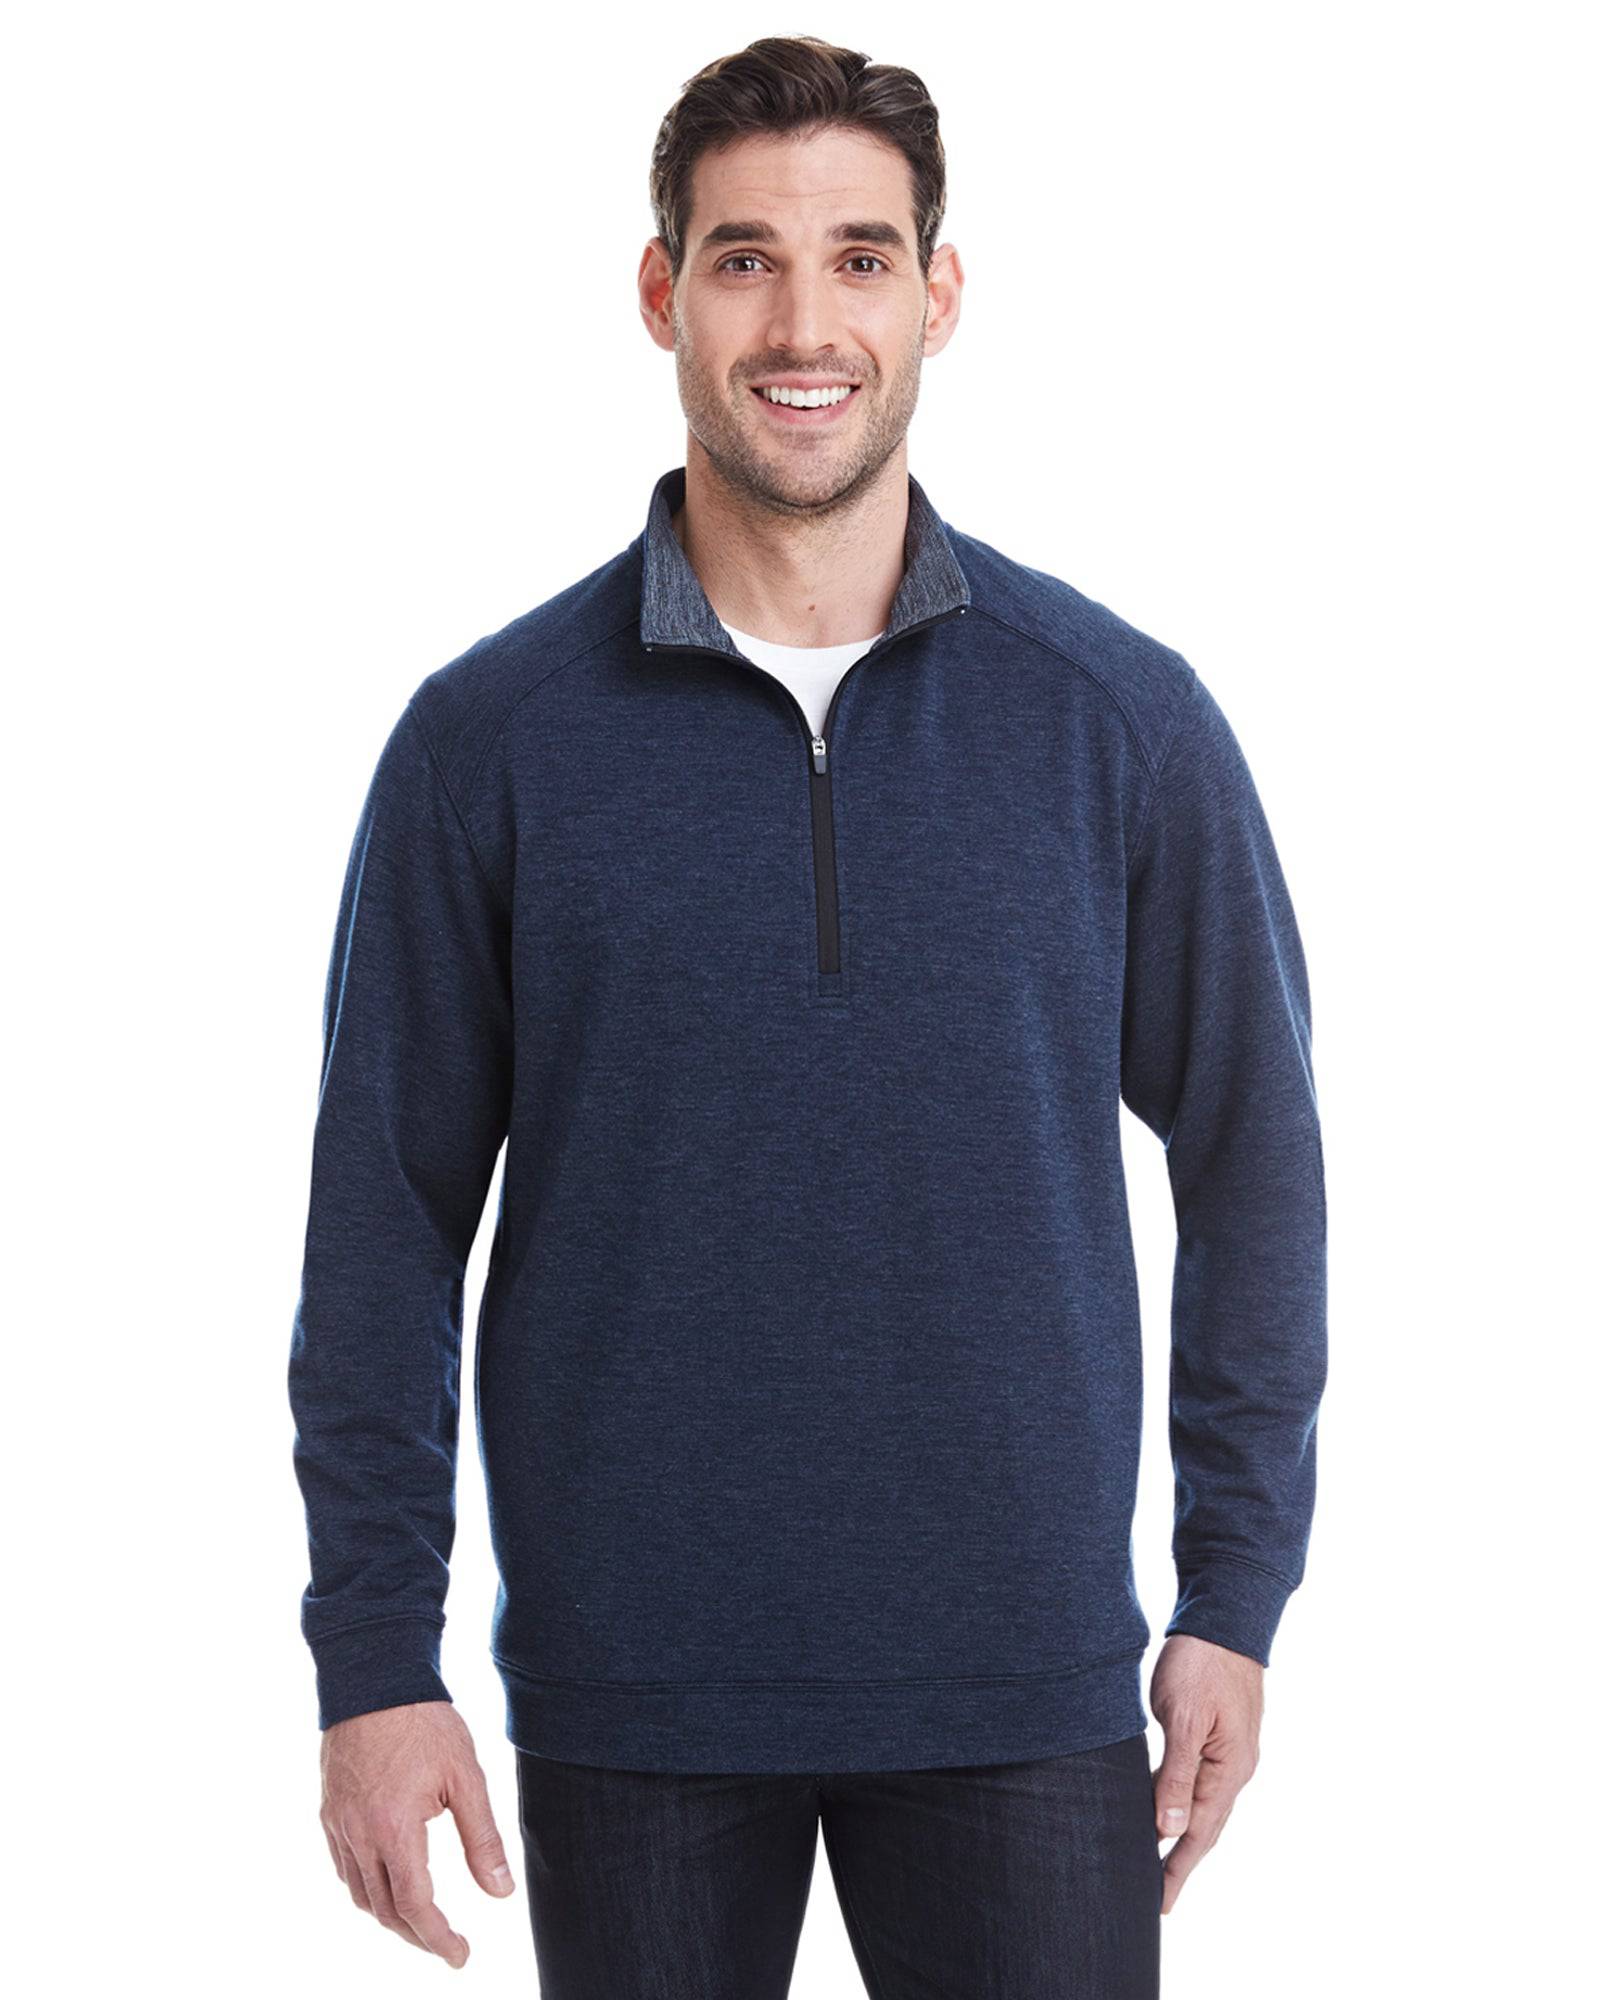 1/4 Zip Pullover in Navy Heather Tech Stretch - Rainwater's Men's Clothing and Tuxedo Rental